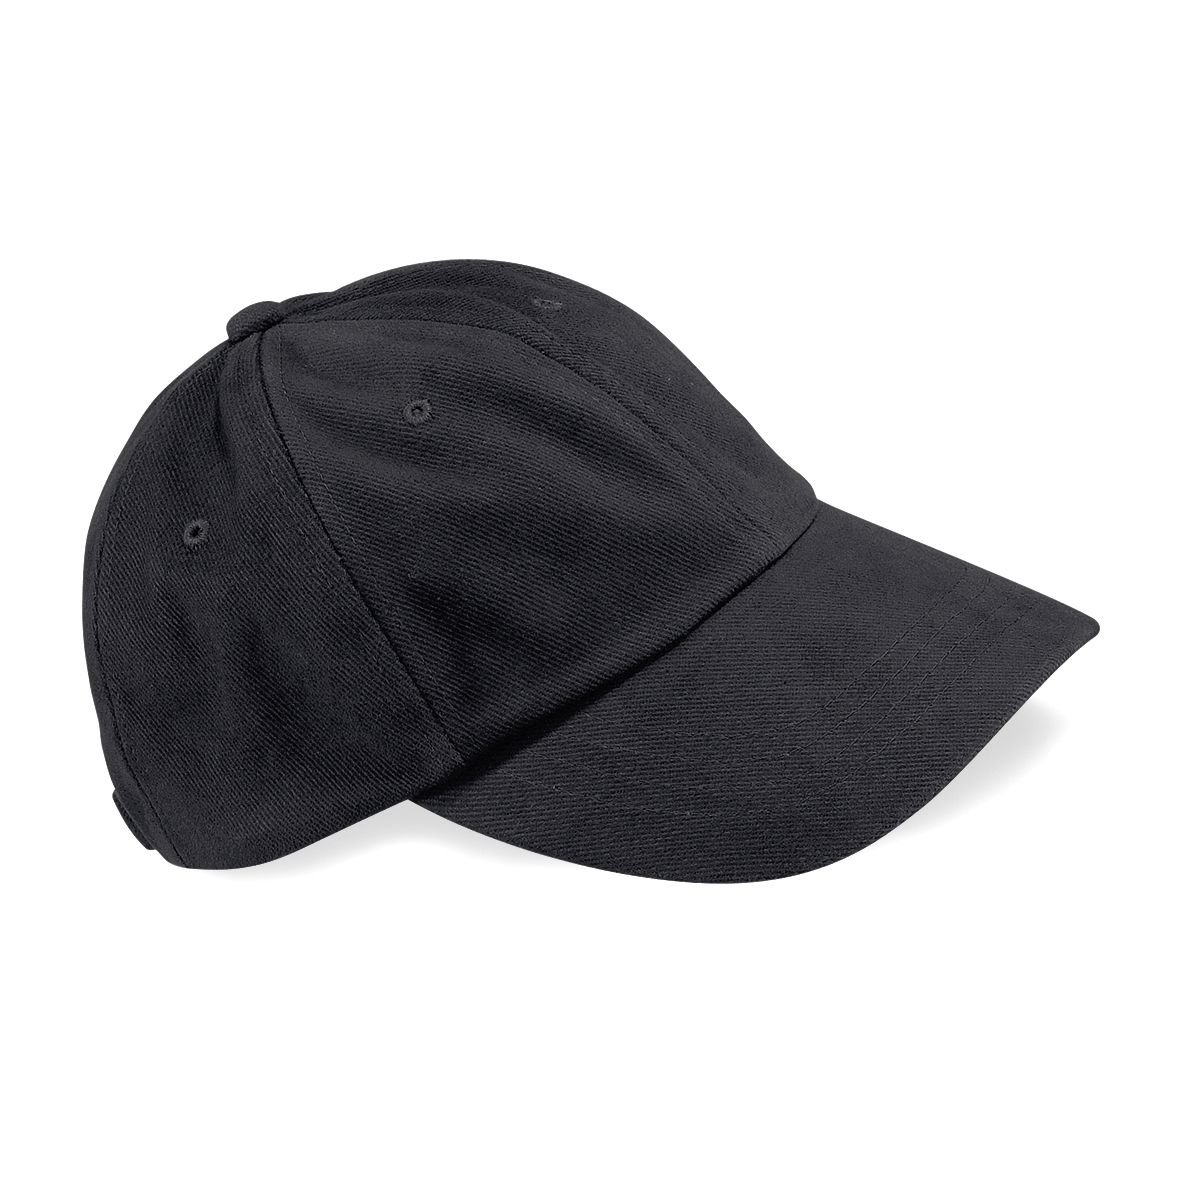 Low Profile Heavy Brushed Cotton Cap in black with black visor, eyelets and button